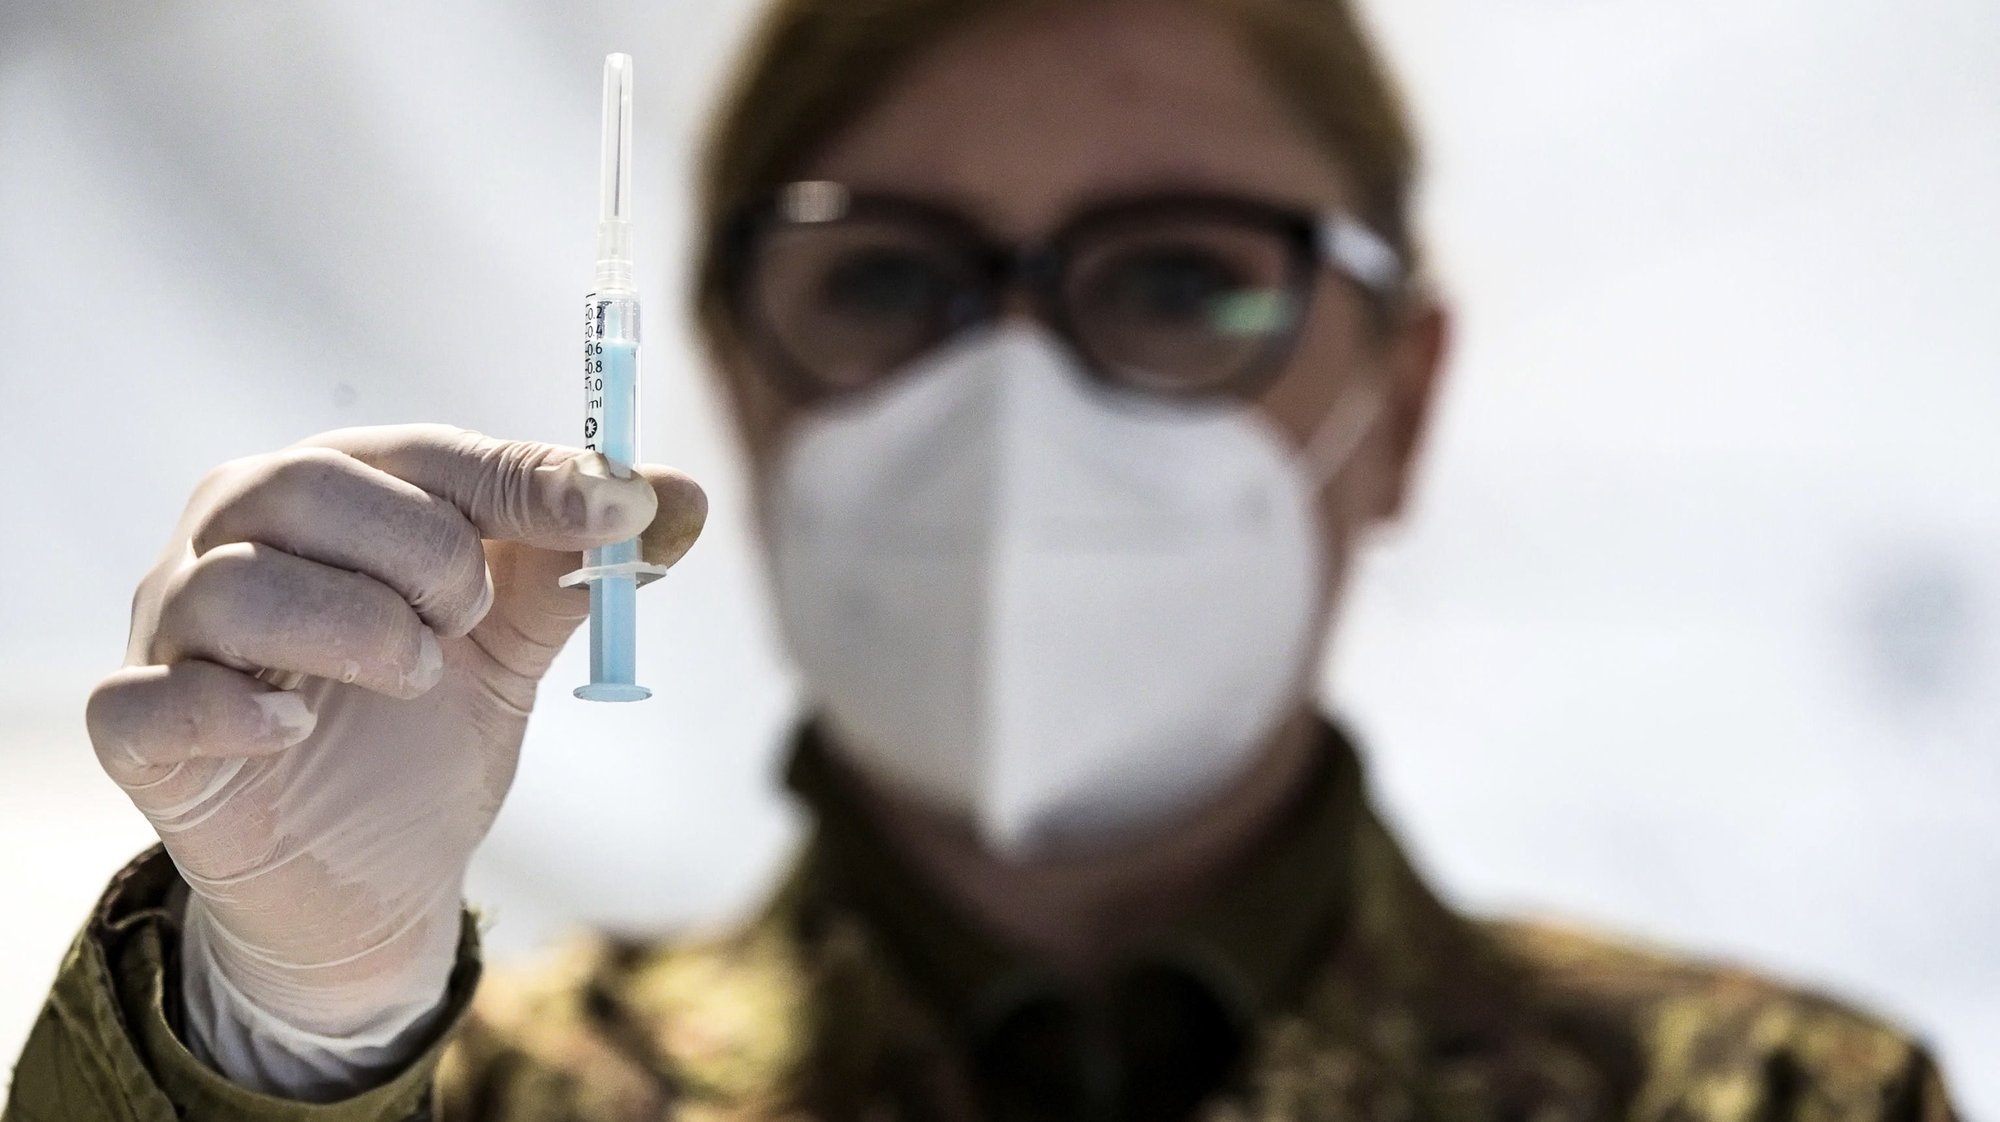 epa09085625 An Italian Army soldier shows a dose of the vaccine for vaccination against Covid-19 with AstraZeneca serum at Defence Vaccination Centre set up inside the military citadel of Cecchignola, Rome, Italy, 20 March 2021. EU member countries reintroduced the AstraZeneca Covid-19 vaccine in their inoculation campaigns following the European Medicines Agency (EMA) announcement of 18 March to uphold its approval of the vaccine. Some countries stopped giving the vaccine over fears there might be links between the vaccination against Covid-19 with the AstraZeneca vaccine and a rare number of blood clots.  EPA/ANGELO CARCONI  EPA-EFE/ANGELO CARCONI